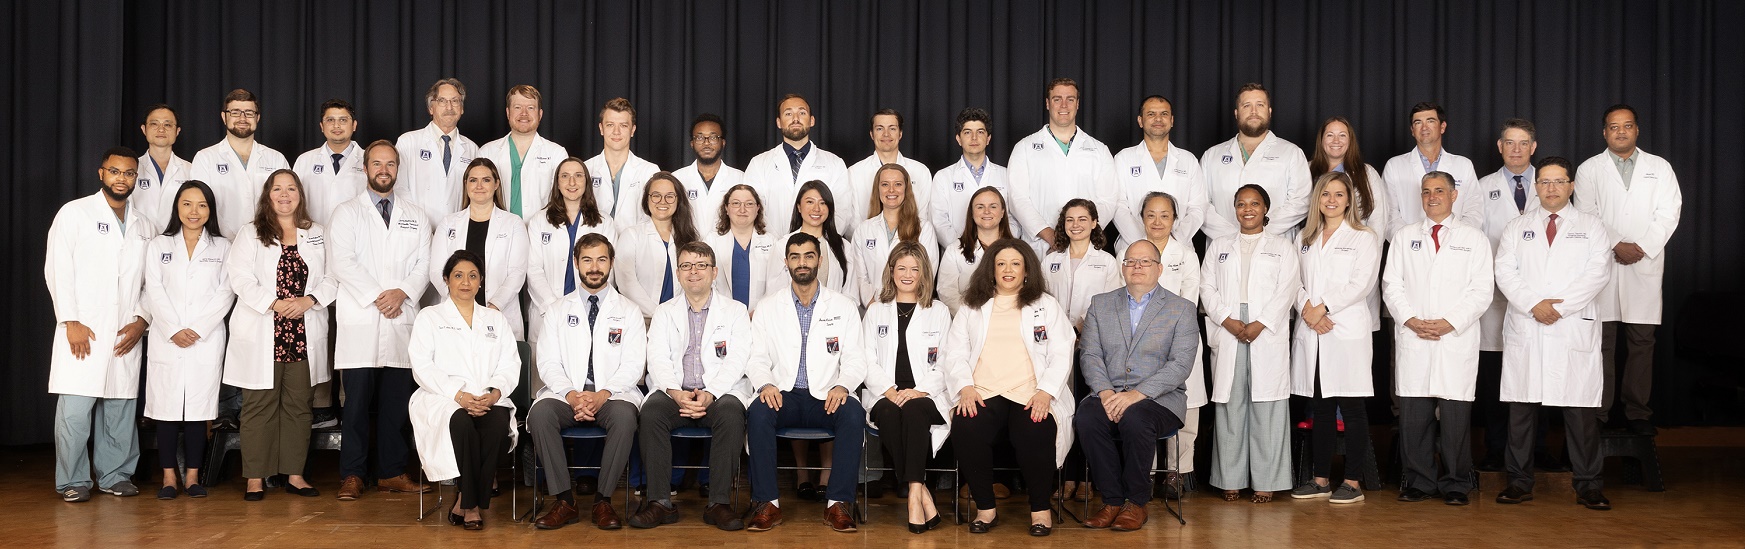 General Surgery Residents posing outside for picture